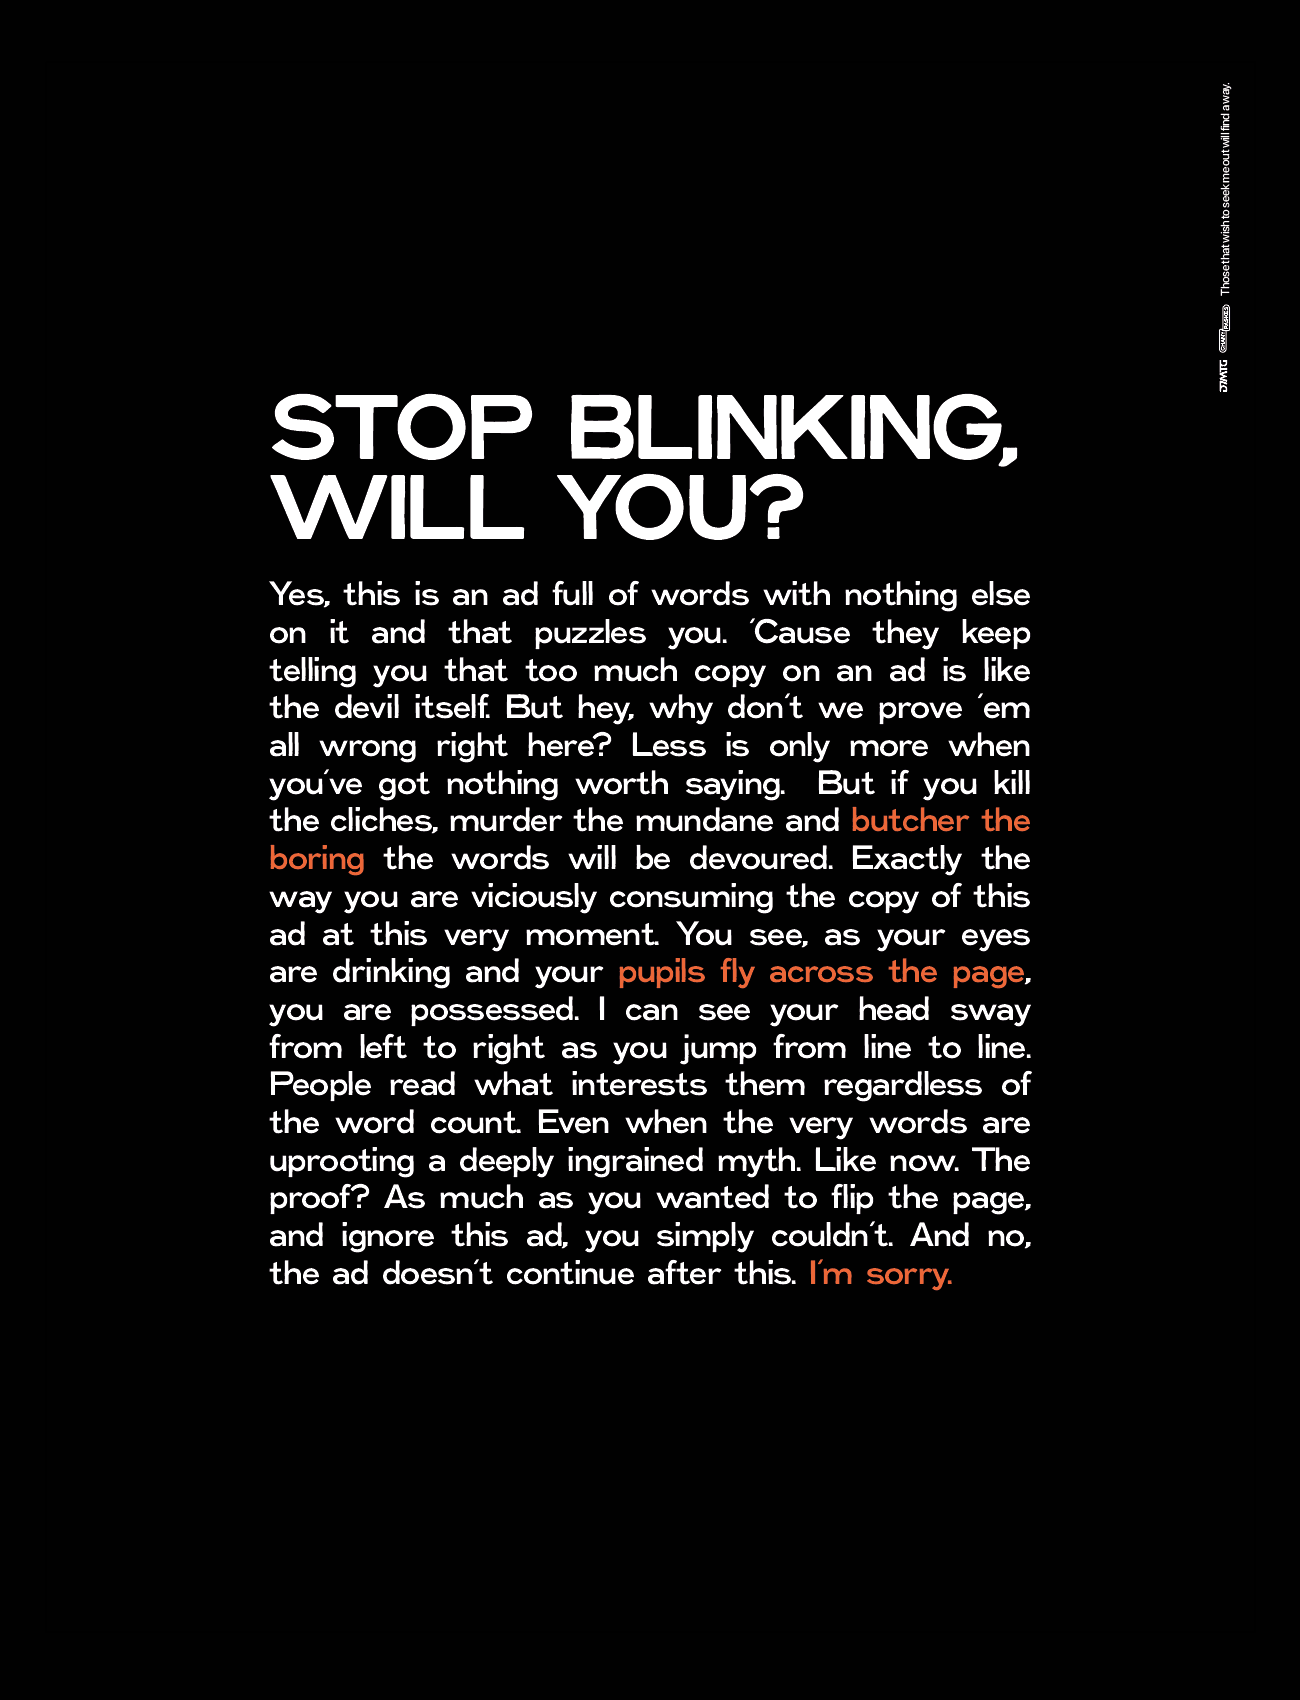 Advertisement by D7mtg that was placed in Ami Magazine for Chany Paskes with the words: Stop Blinking, Will You?.